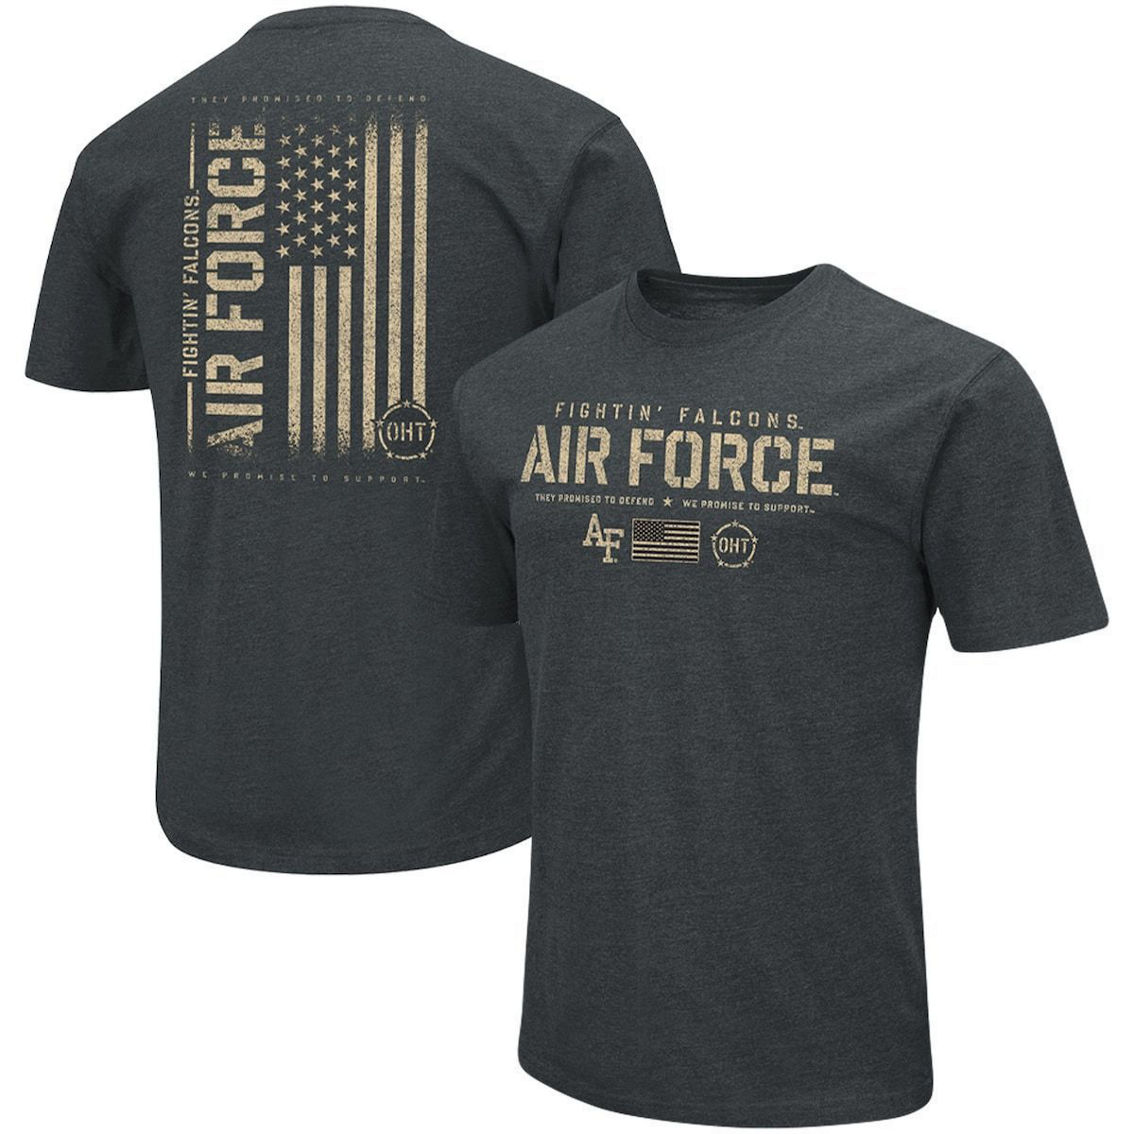 Colosseum Men's Heathered Black Air Force Falcons OHT Military Appreciation Flag 2.0 T-Shirt - Image 2 of 4